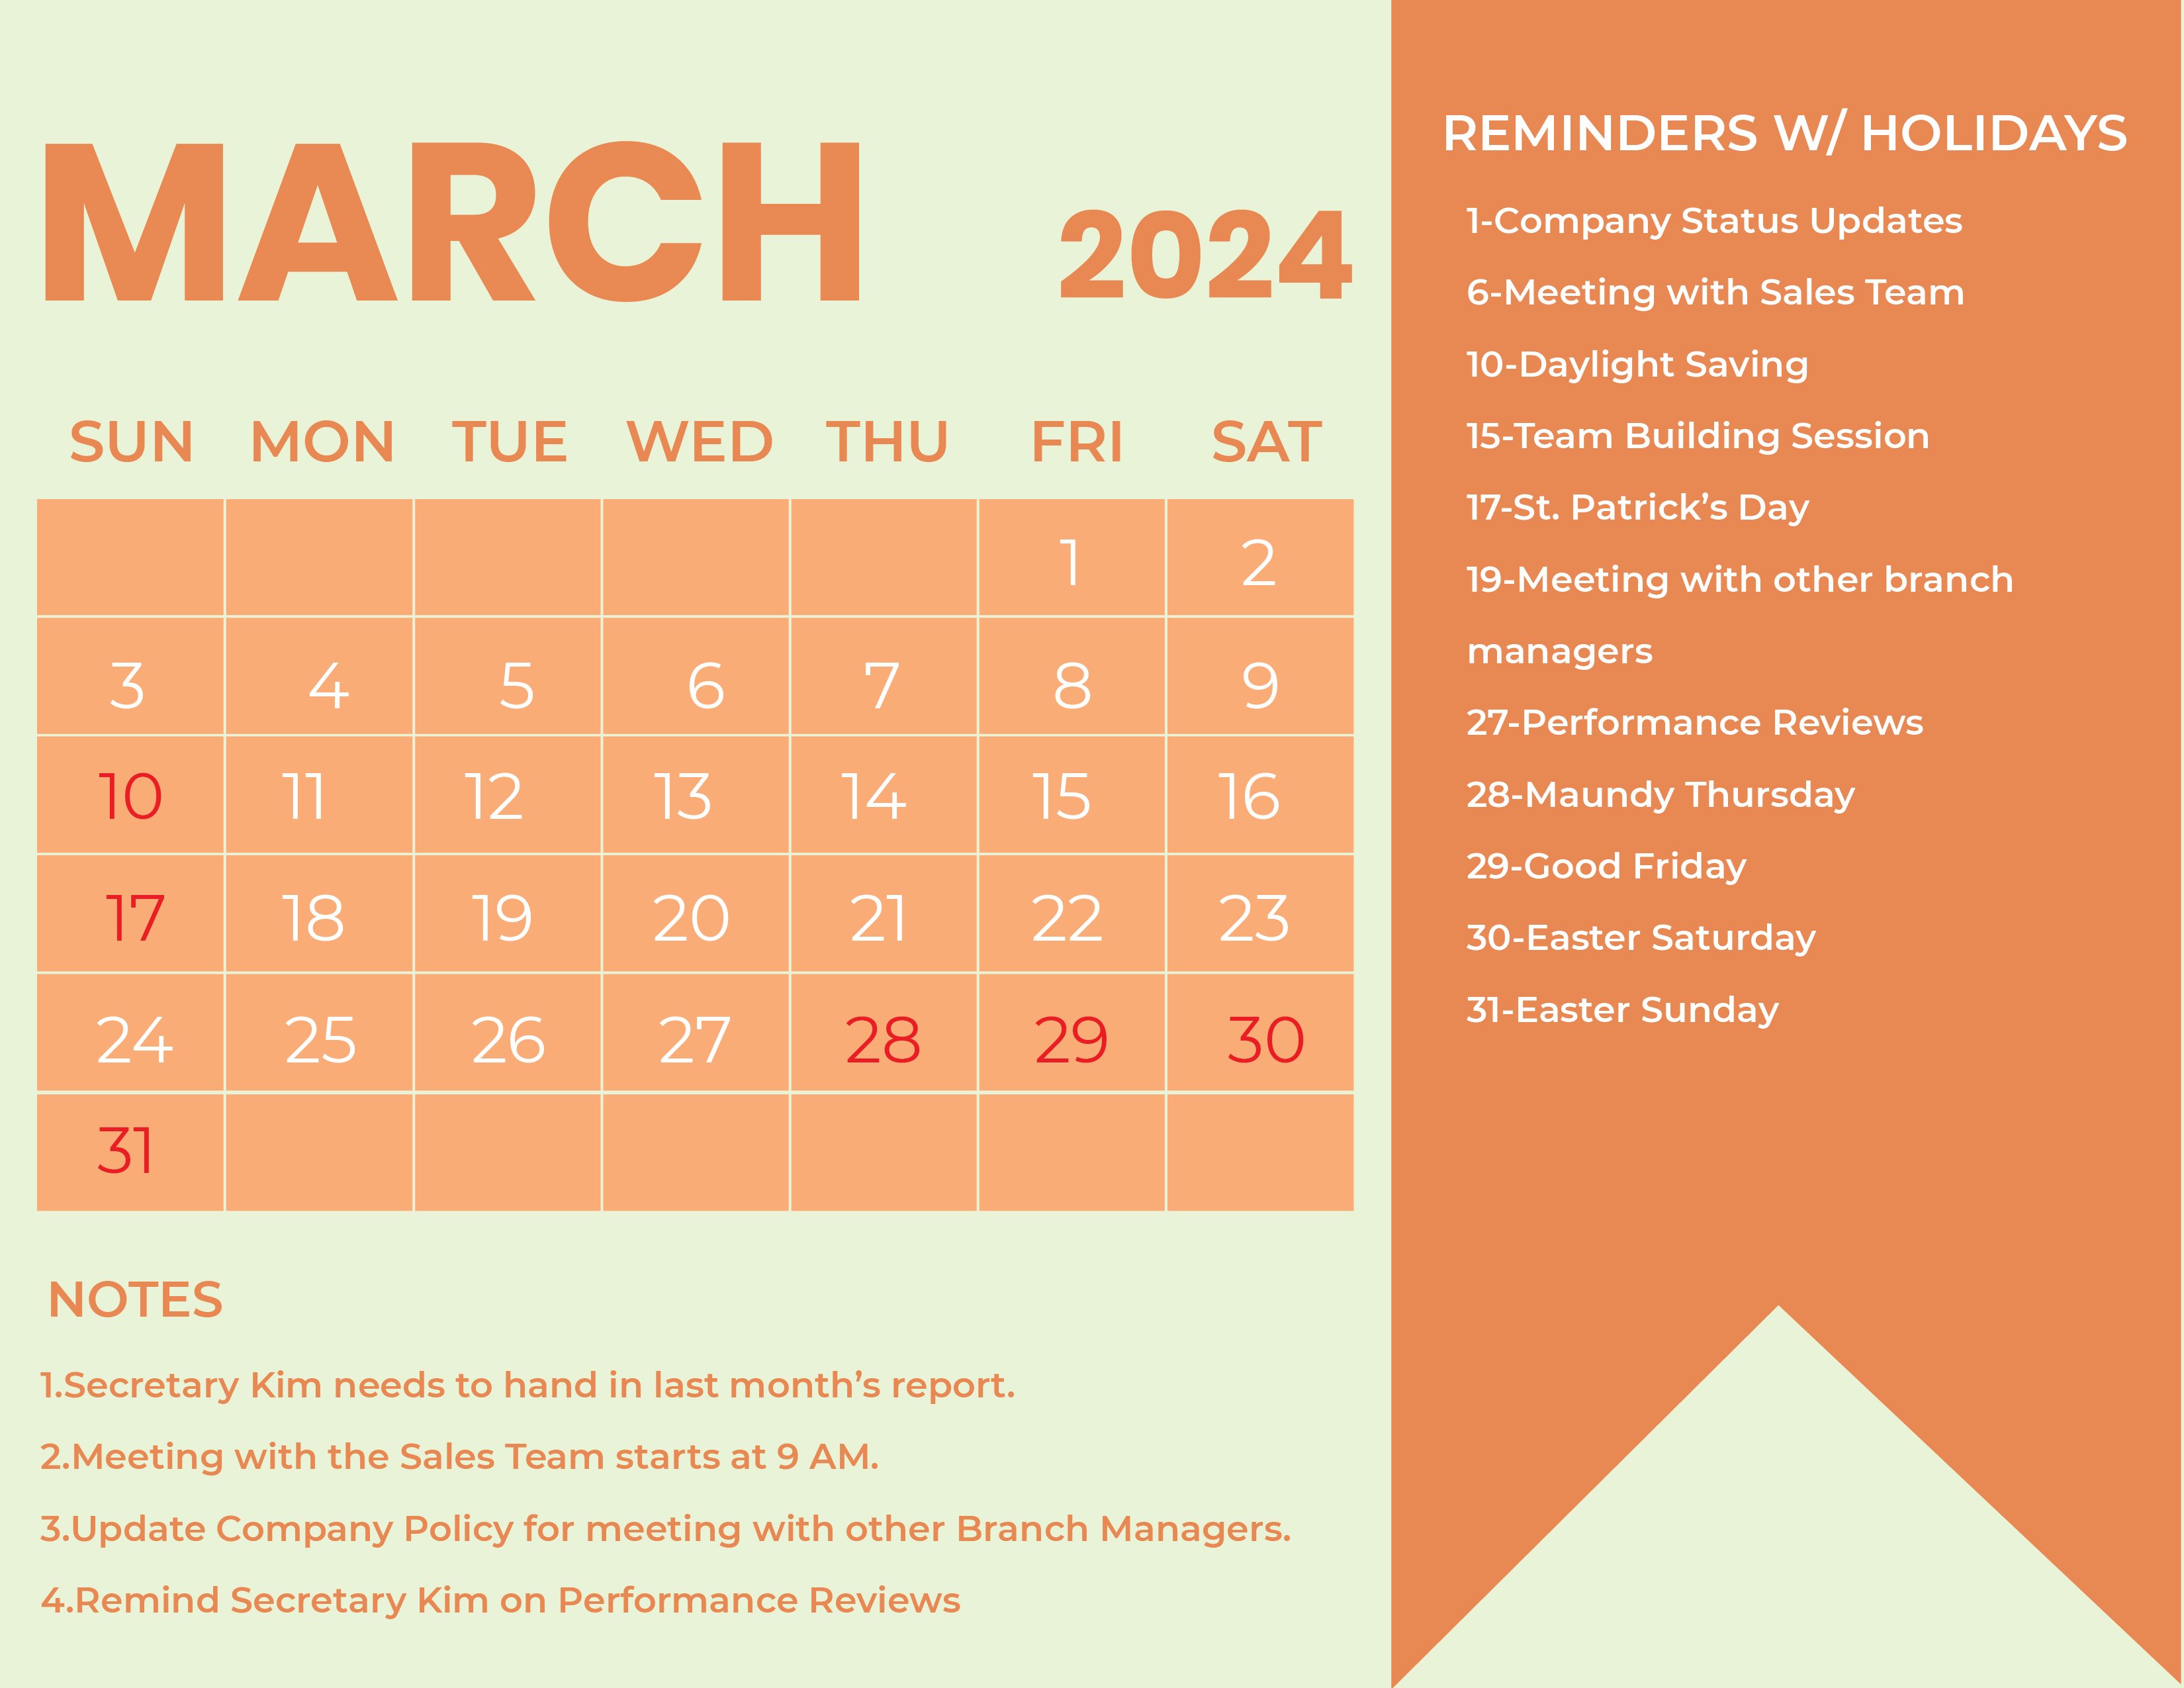 April 2024 Calendar With Holidays Download in Word, Illustrator, EPS